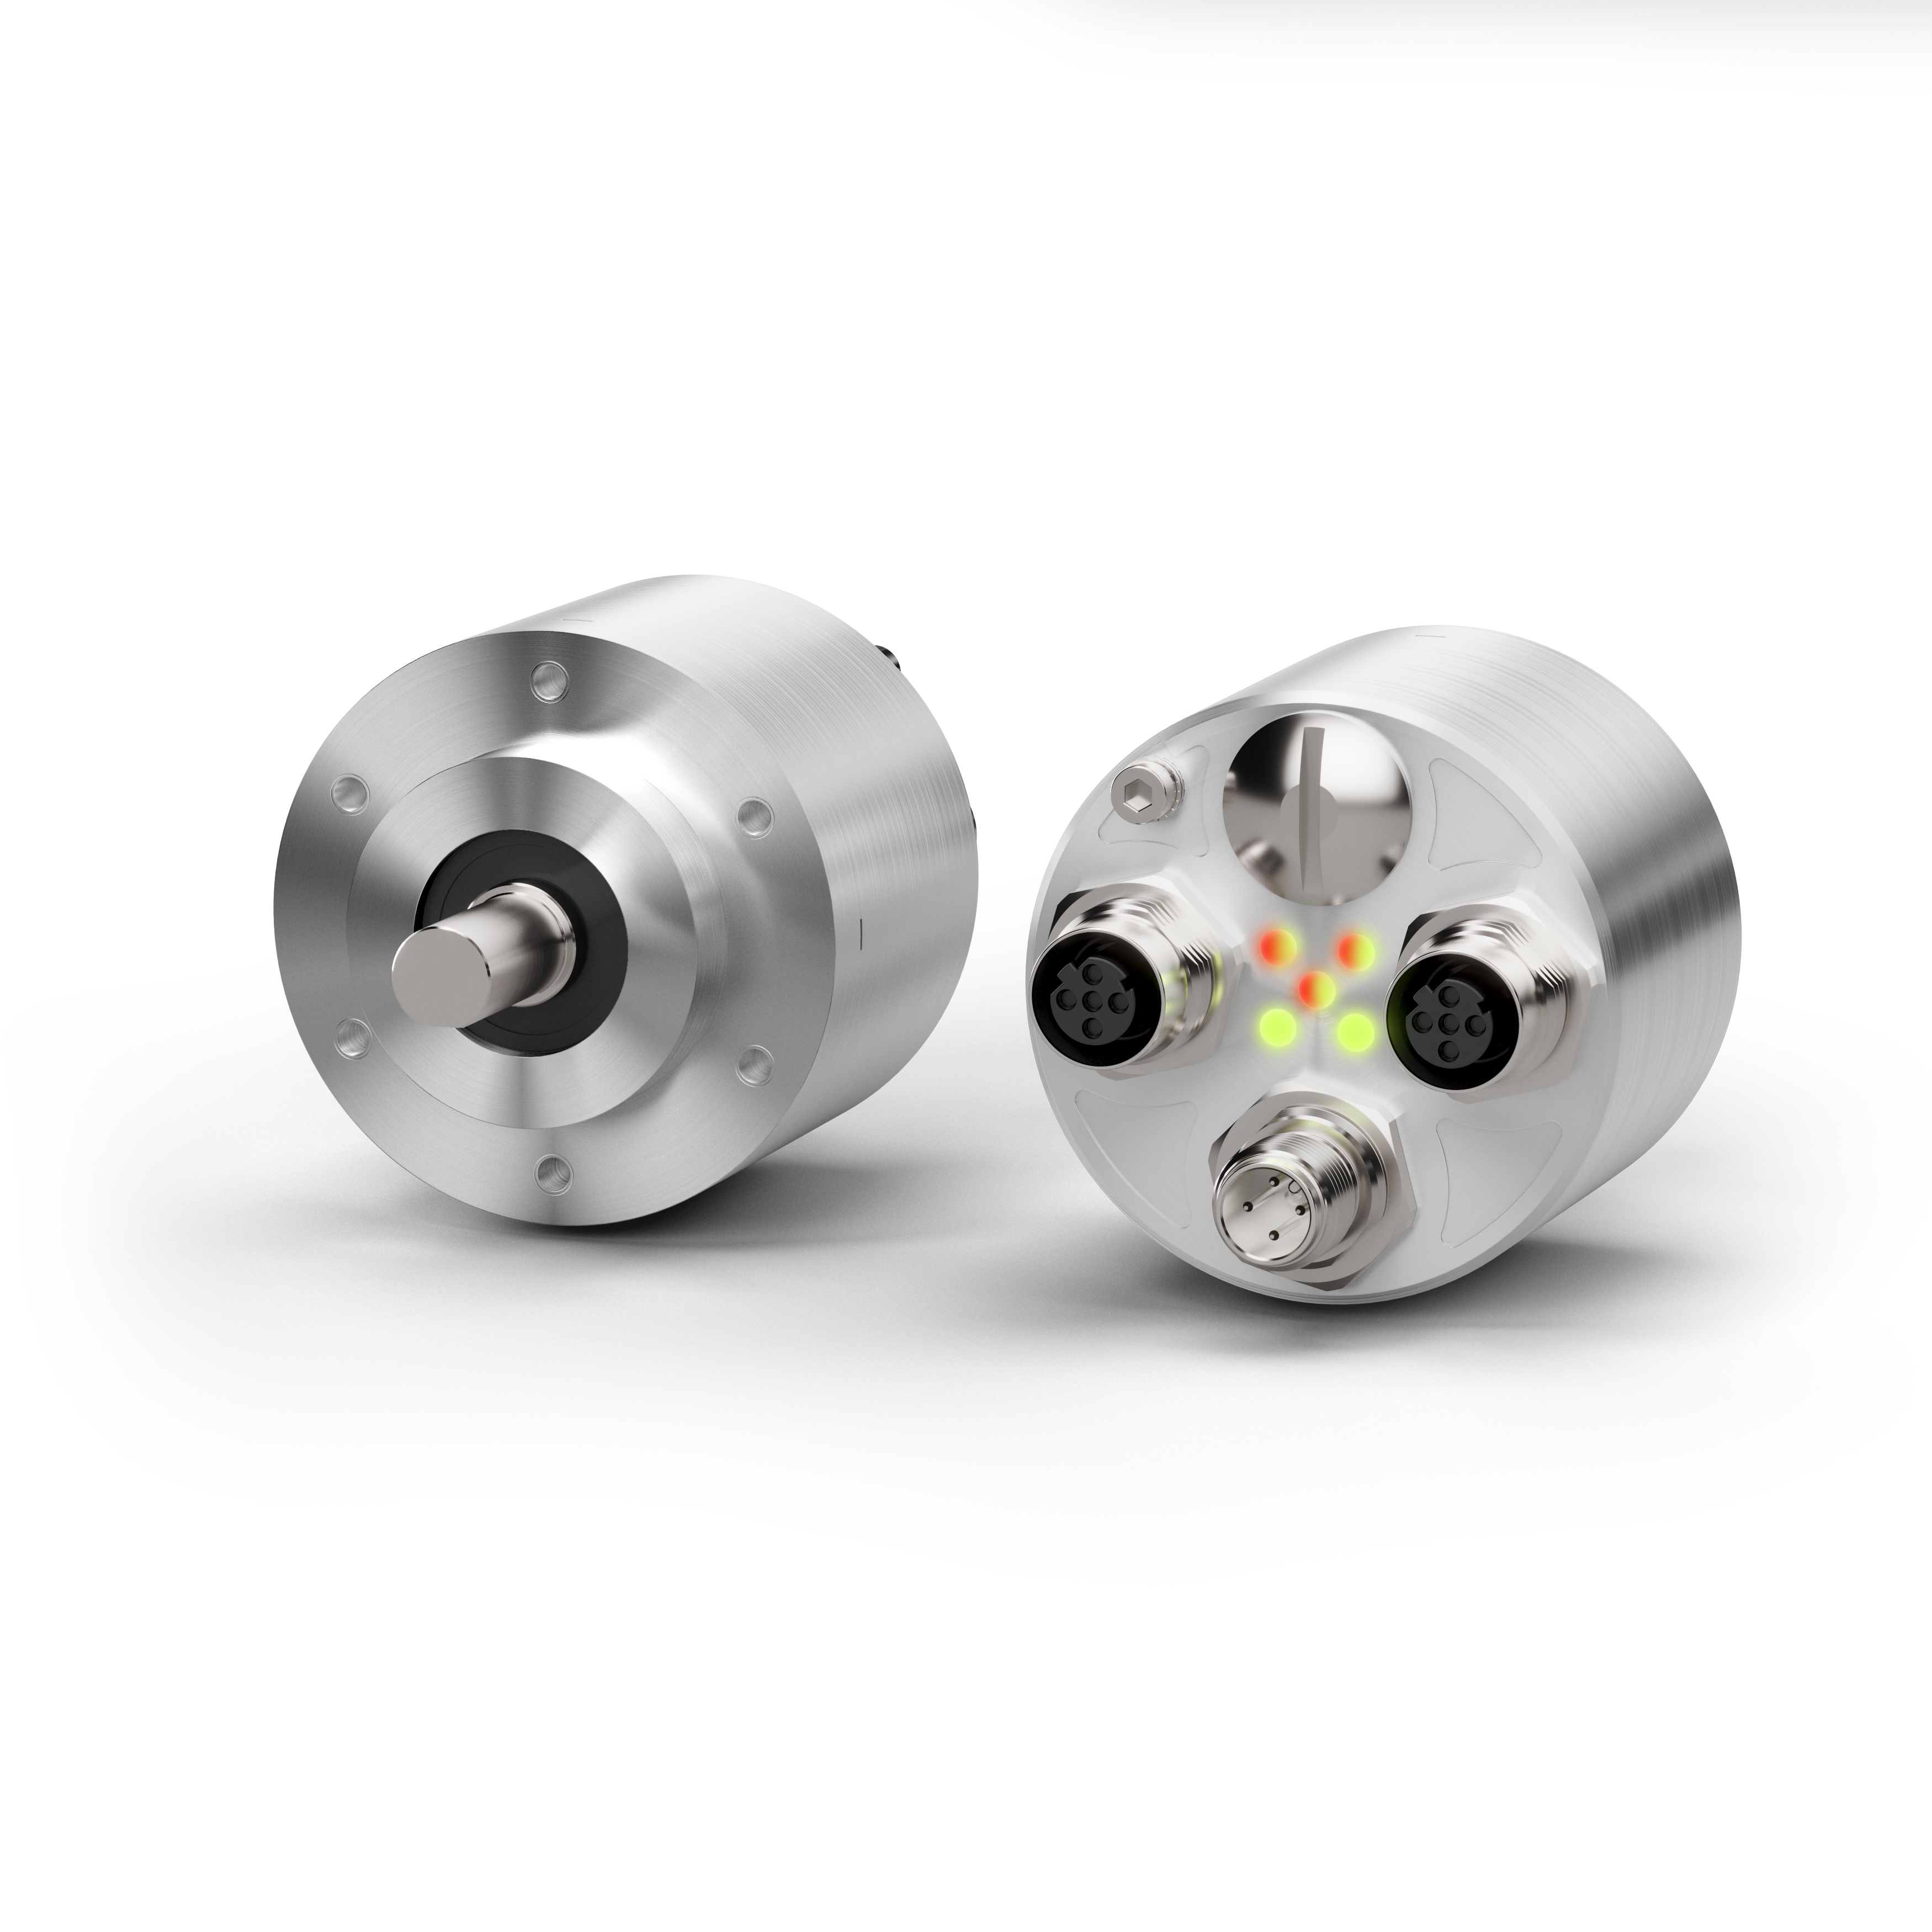 Lika equipped its well-established high-performance, compact EXM58 fully magnetic encoder and EXO58 optical sensing devices with the CLPA’s software stack to ensure compatibility with CC-Link IE Field Basic. ©Lika